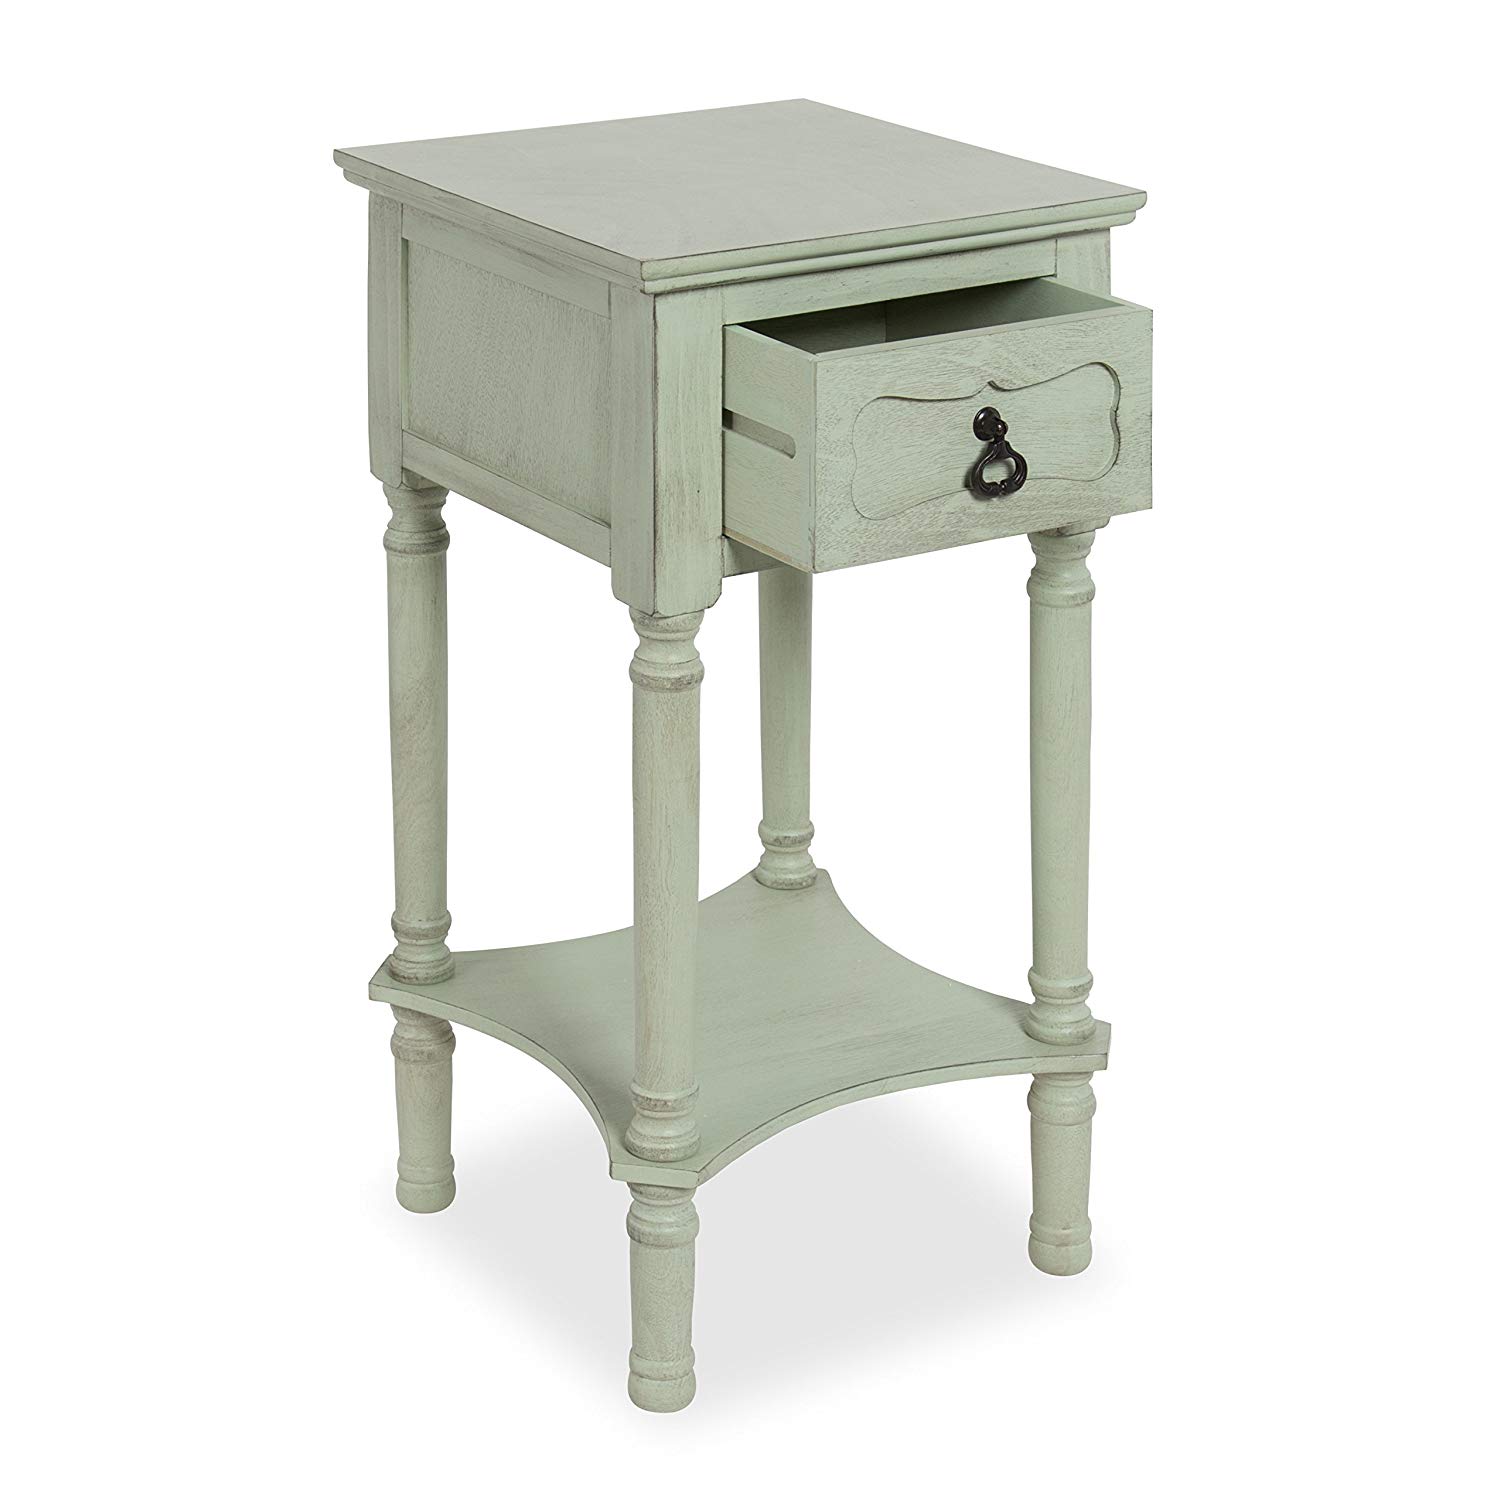 kate and laurel marcella classic nightstand side end carmen metal accent table with drawer lower shelf vintage pastel green kitchen dining furniture behind sofa person bar height